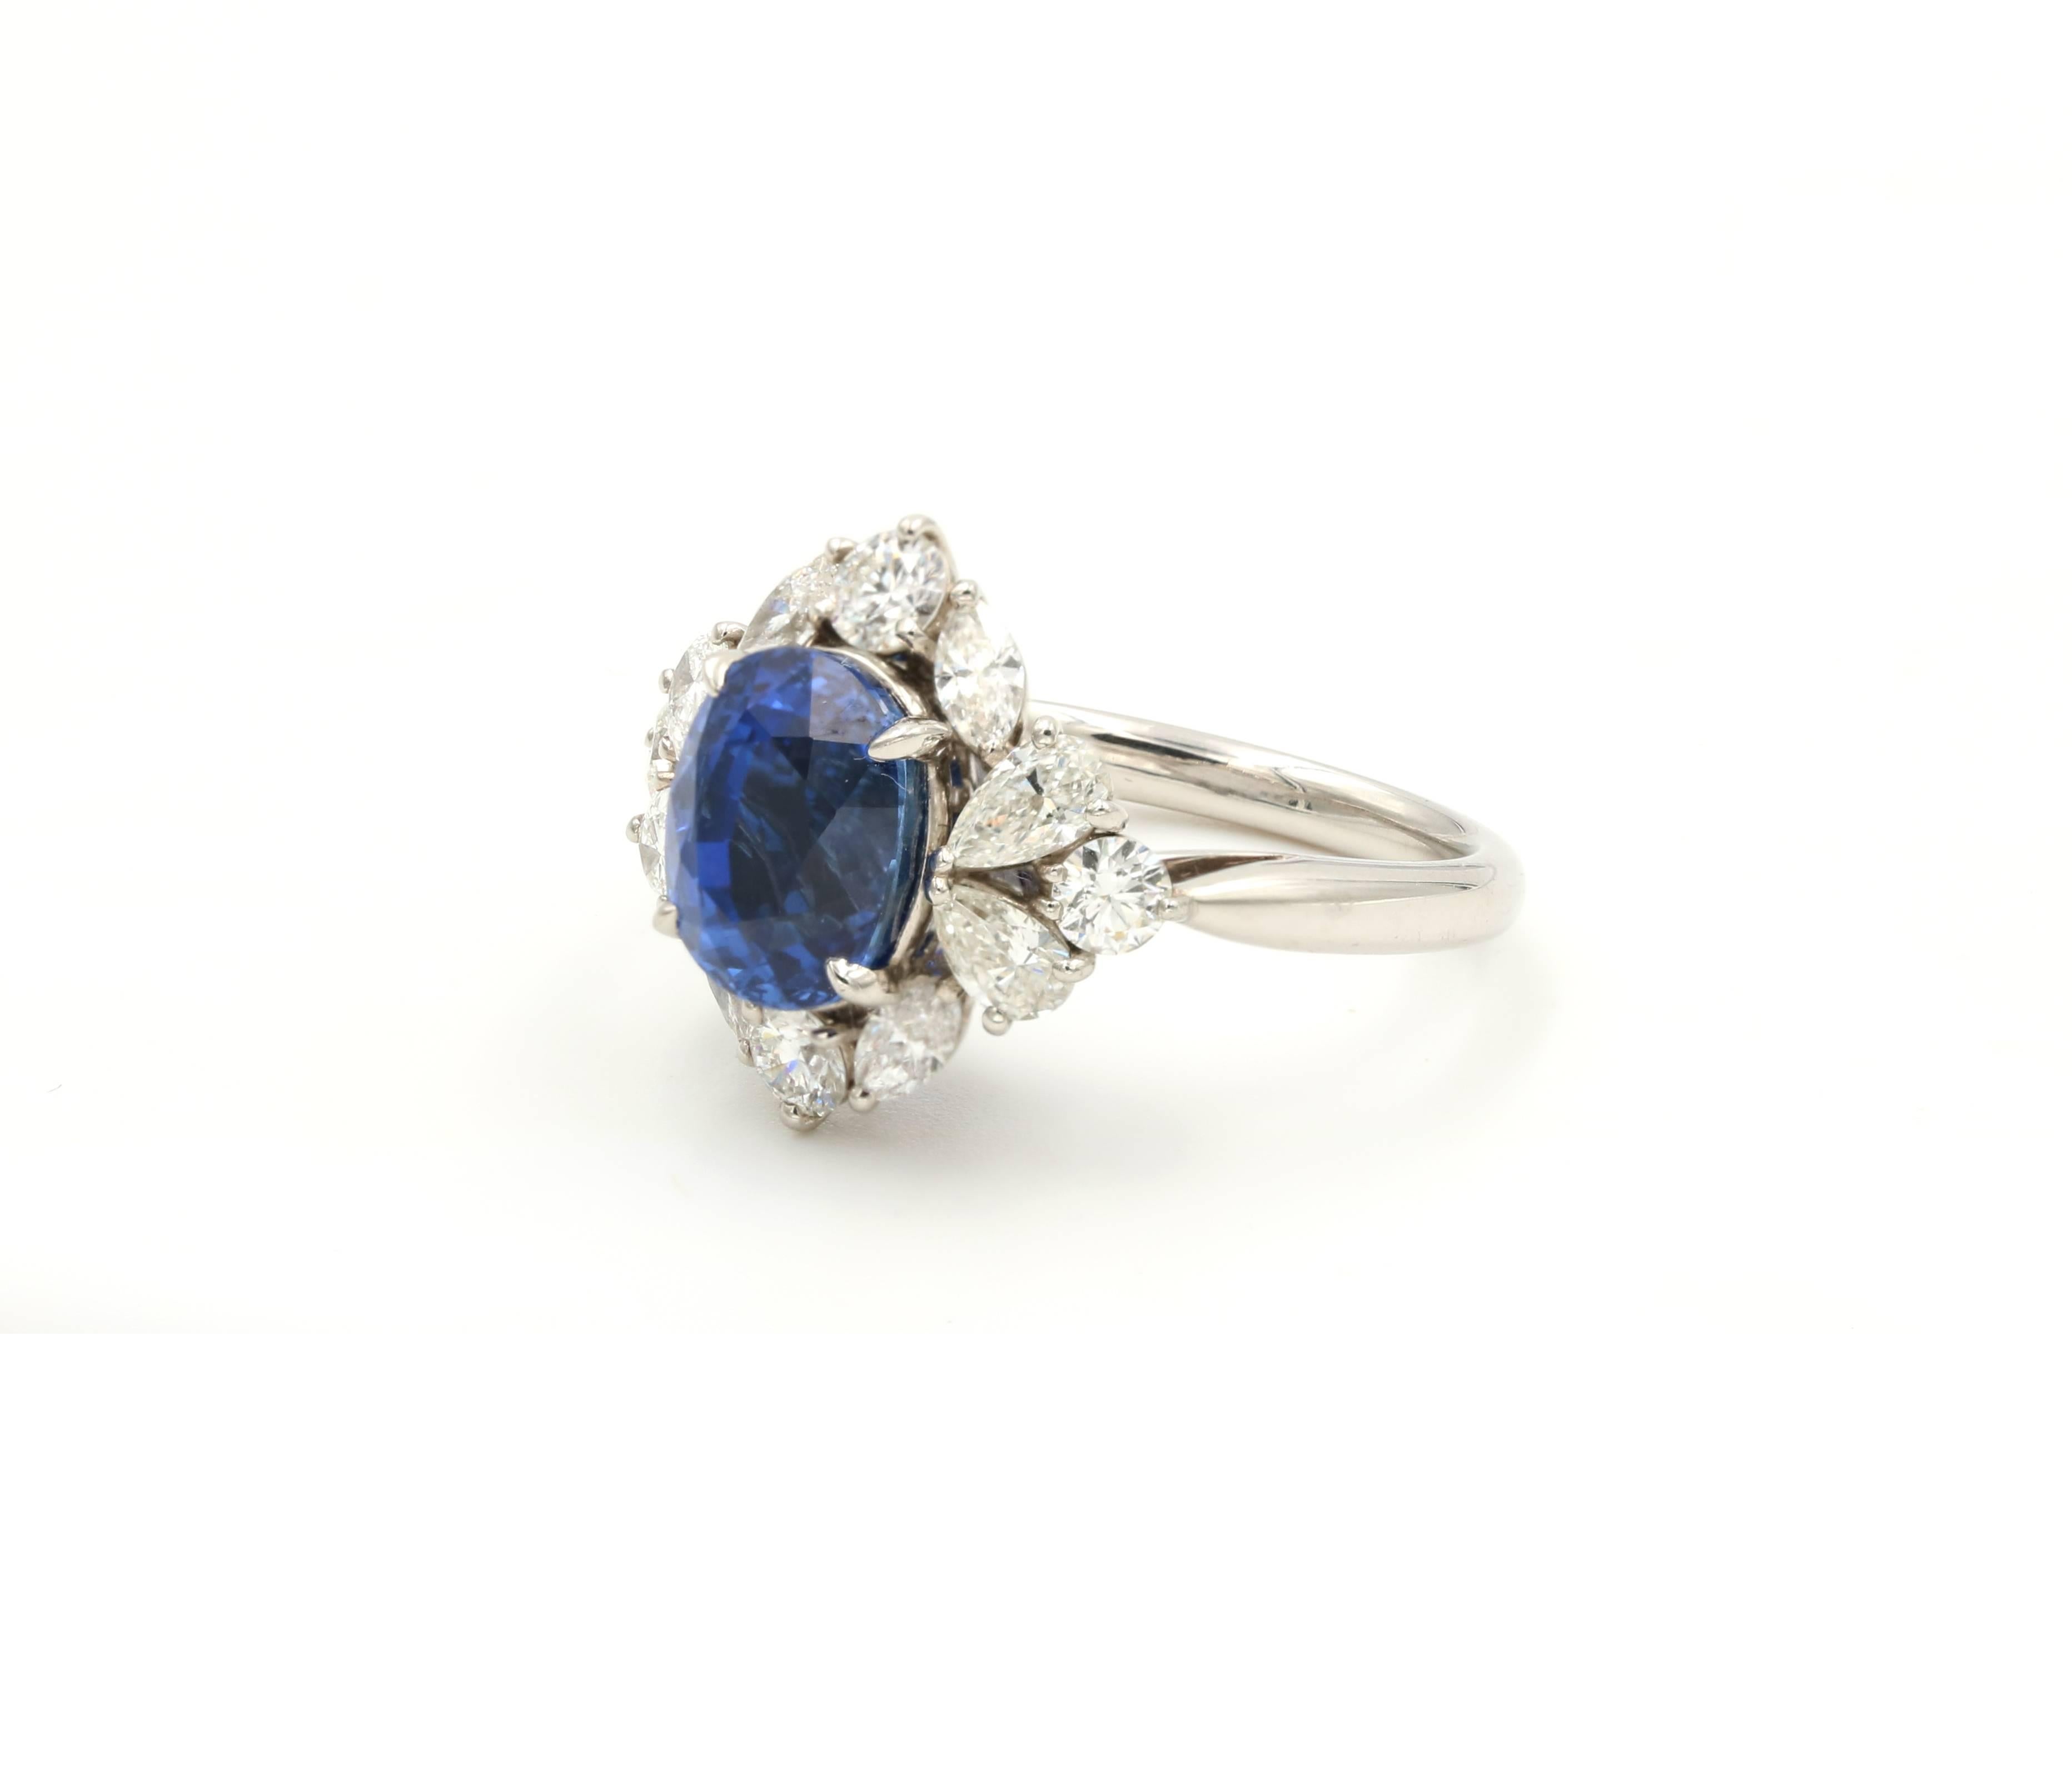 Platinum ring with a perfectly cut 3.81 carat sapphire surrounded by elegant 1.26 carats of diamonds

GIA certificate #1172184585 “Natural sapphire, Heated” 